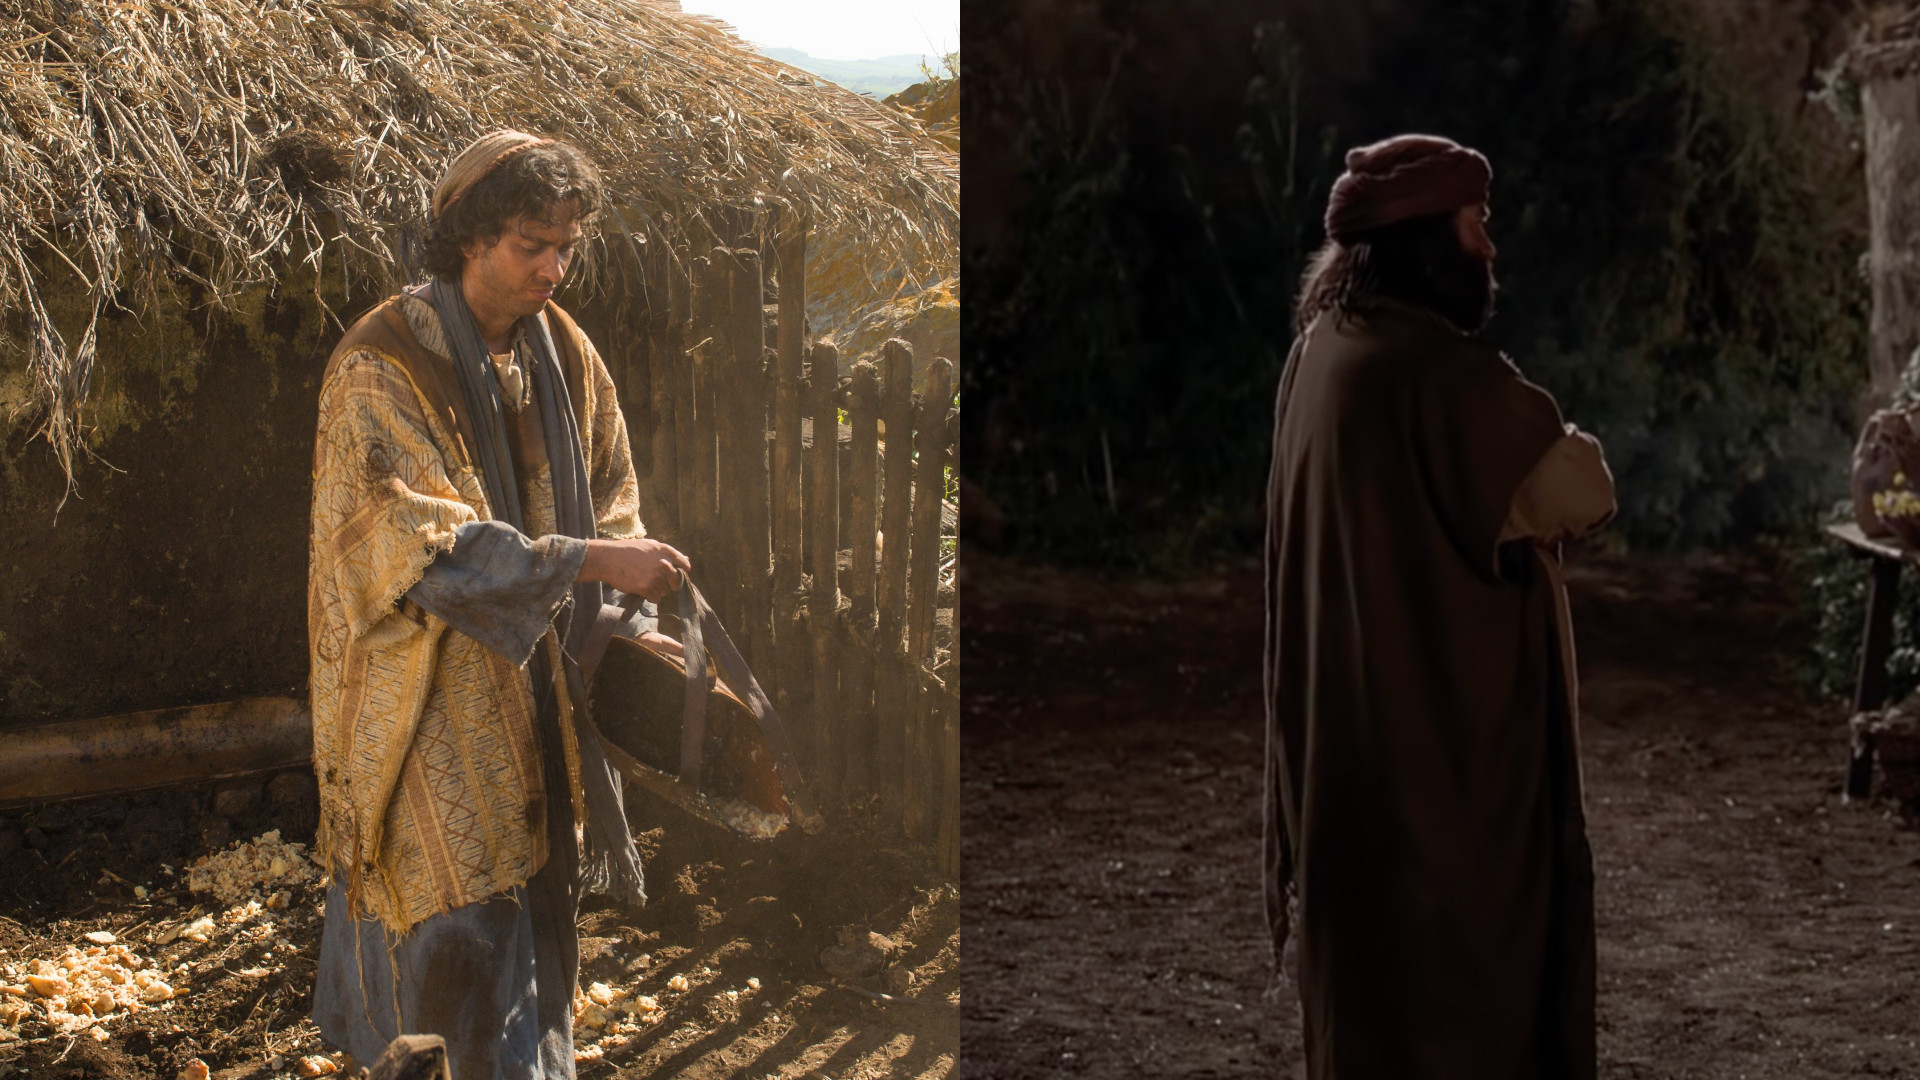 Both sons are represented in a video from The Church of Jesus Christ of Latter-day Saints depicting Jesus's parable of the Prodigal Son.